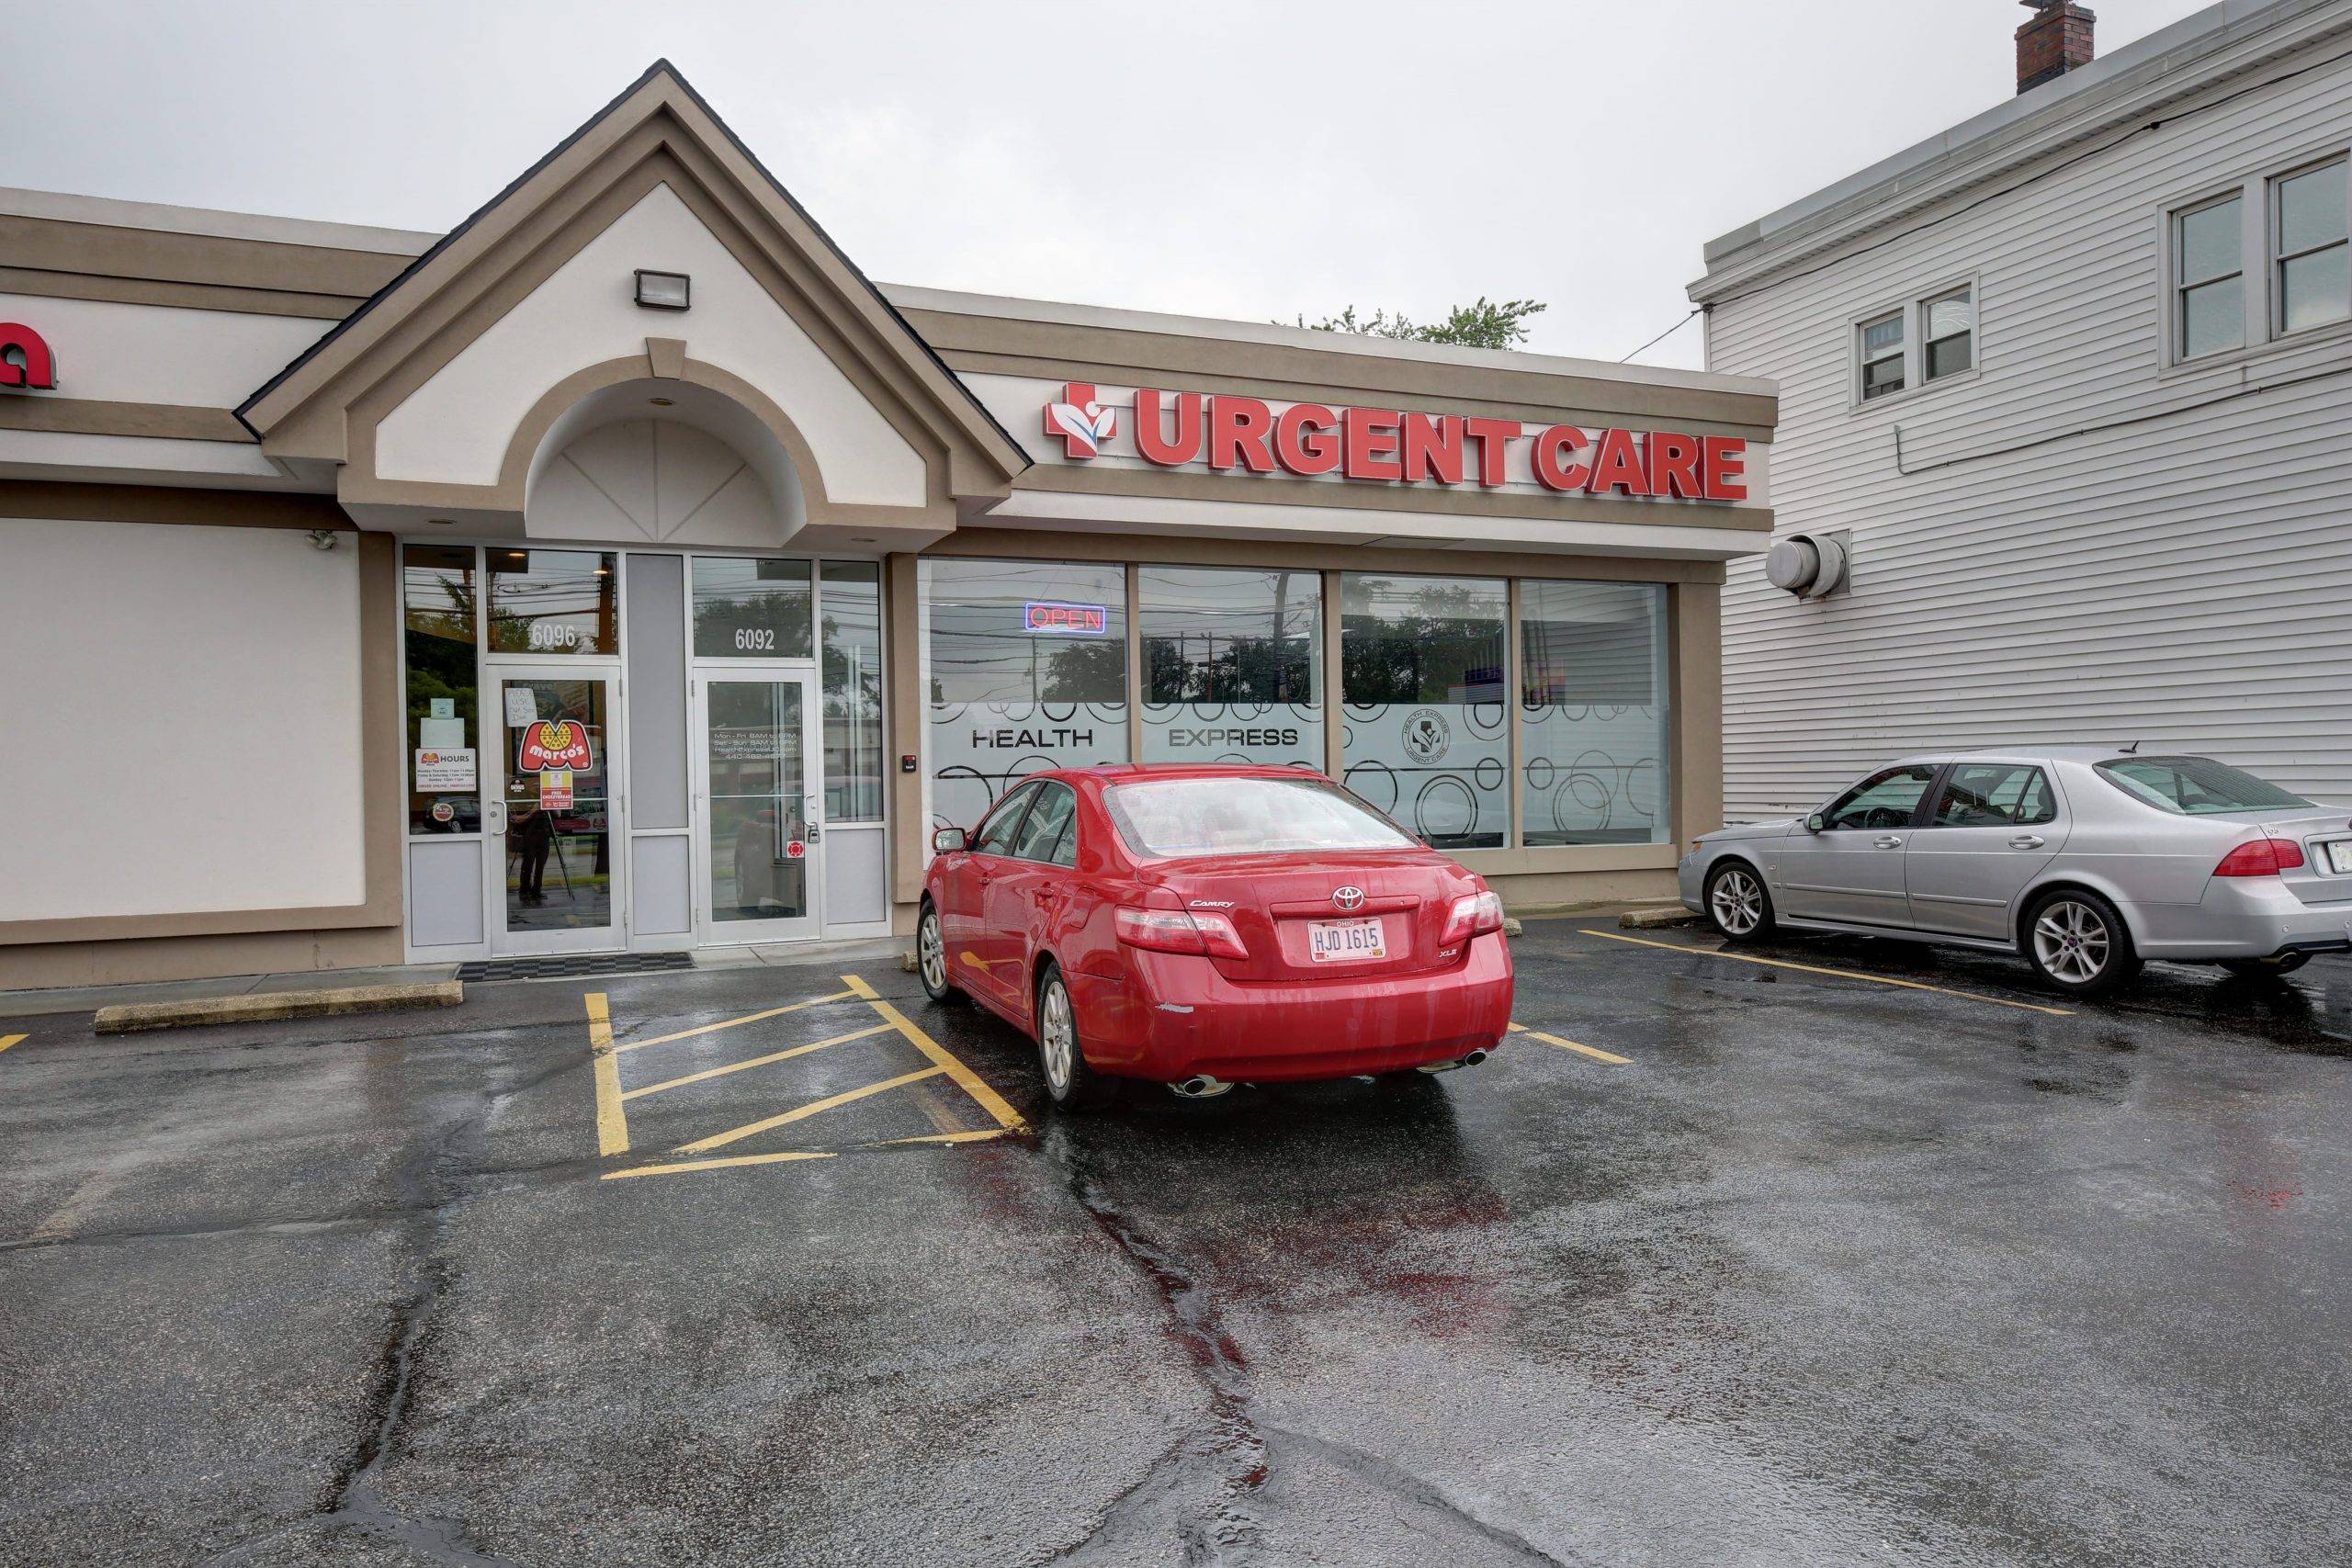 Health Express Urgent Care Mayfield Ohio-min